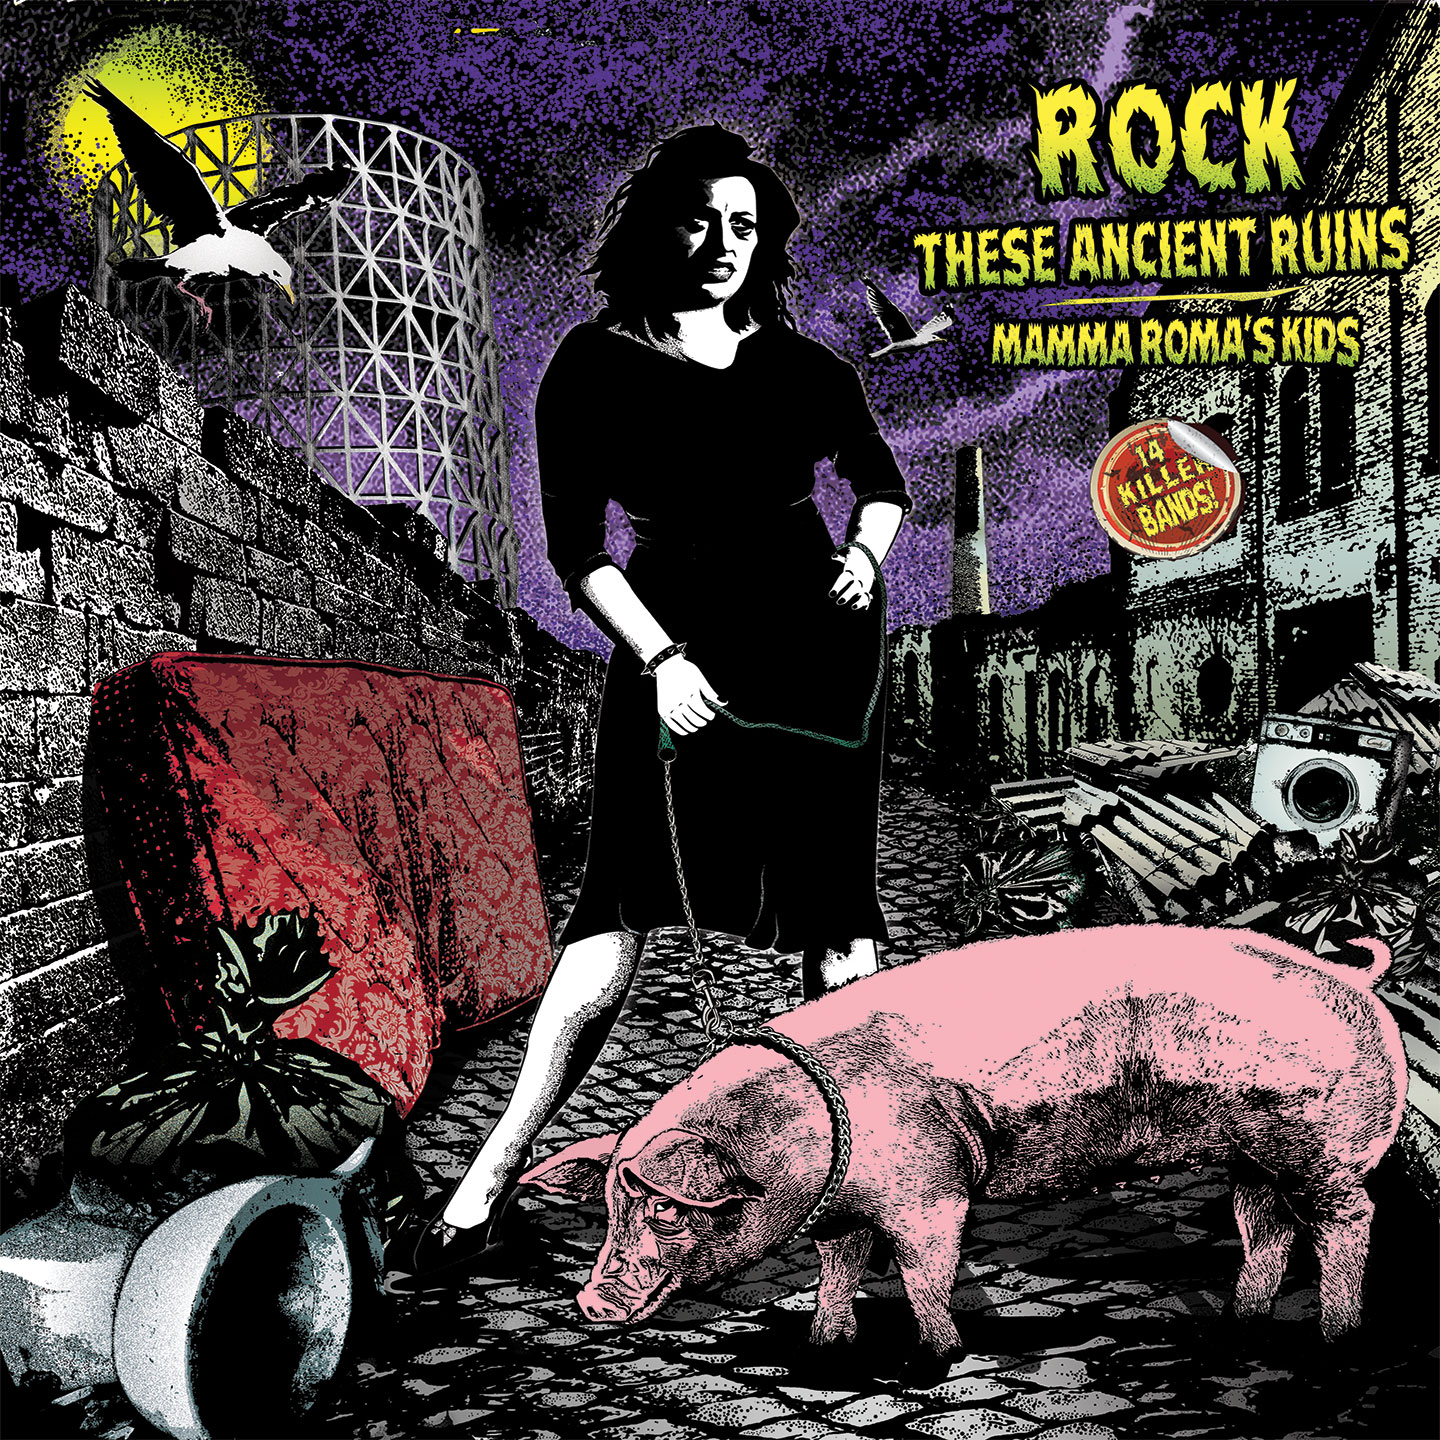 Rock These Ancient Ruins – Mamma Roma’s Kids - Roma Caput (Punk) Mundi - Rock These Ancient Ruins – Mamma Roma’s Kids